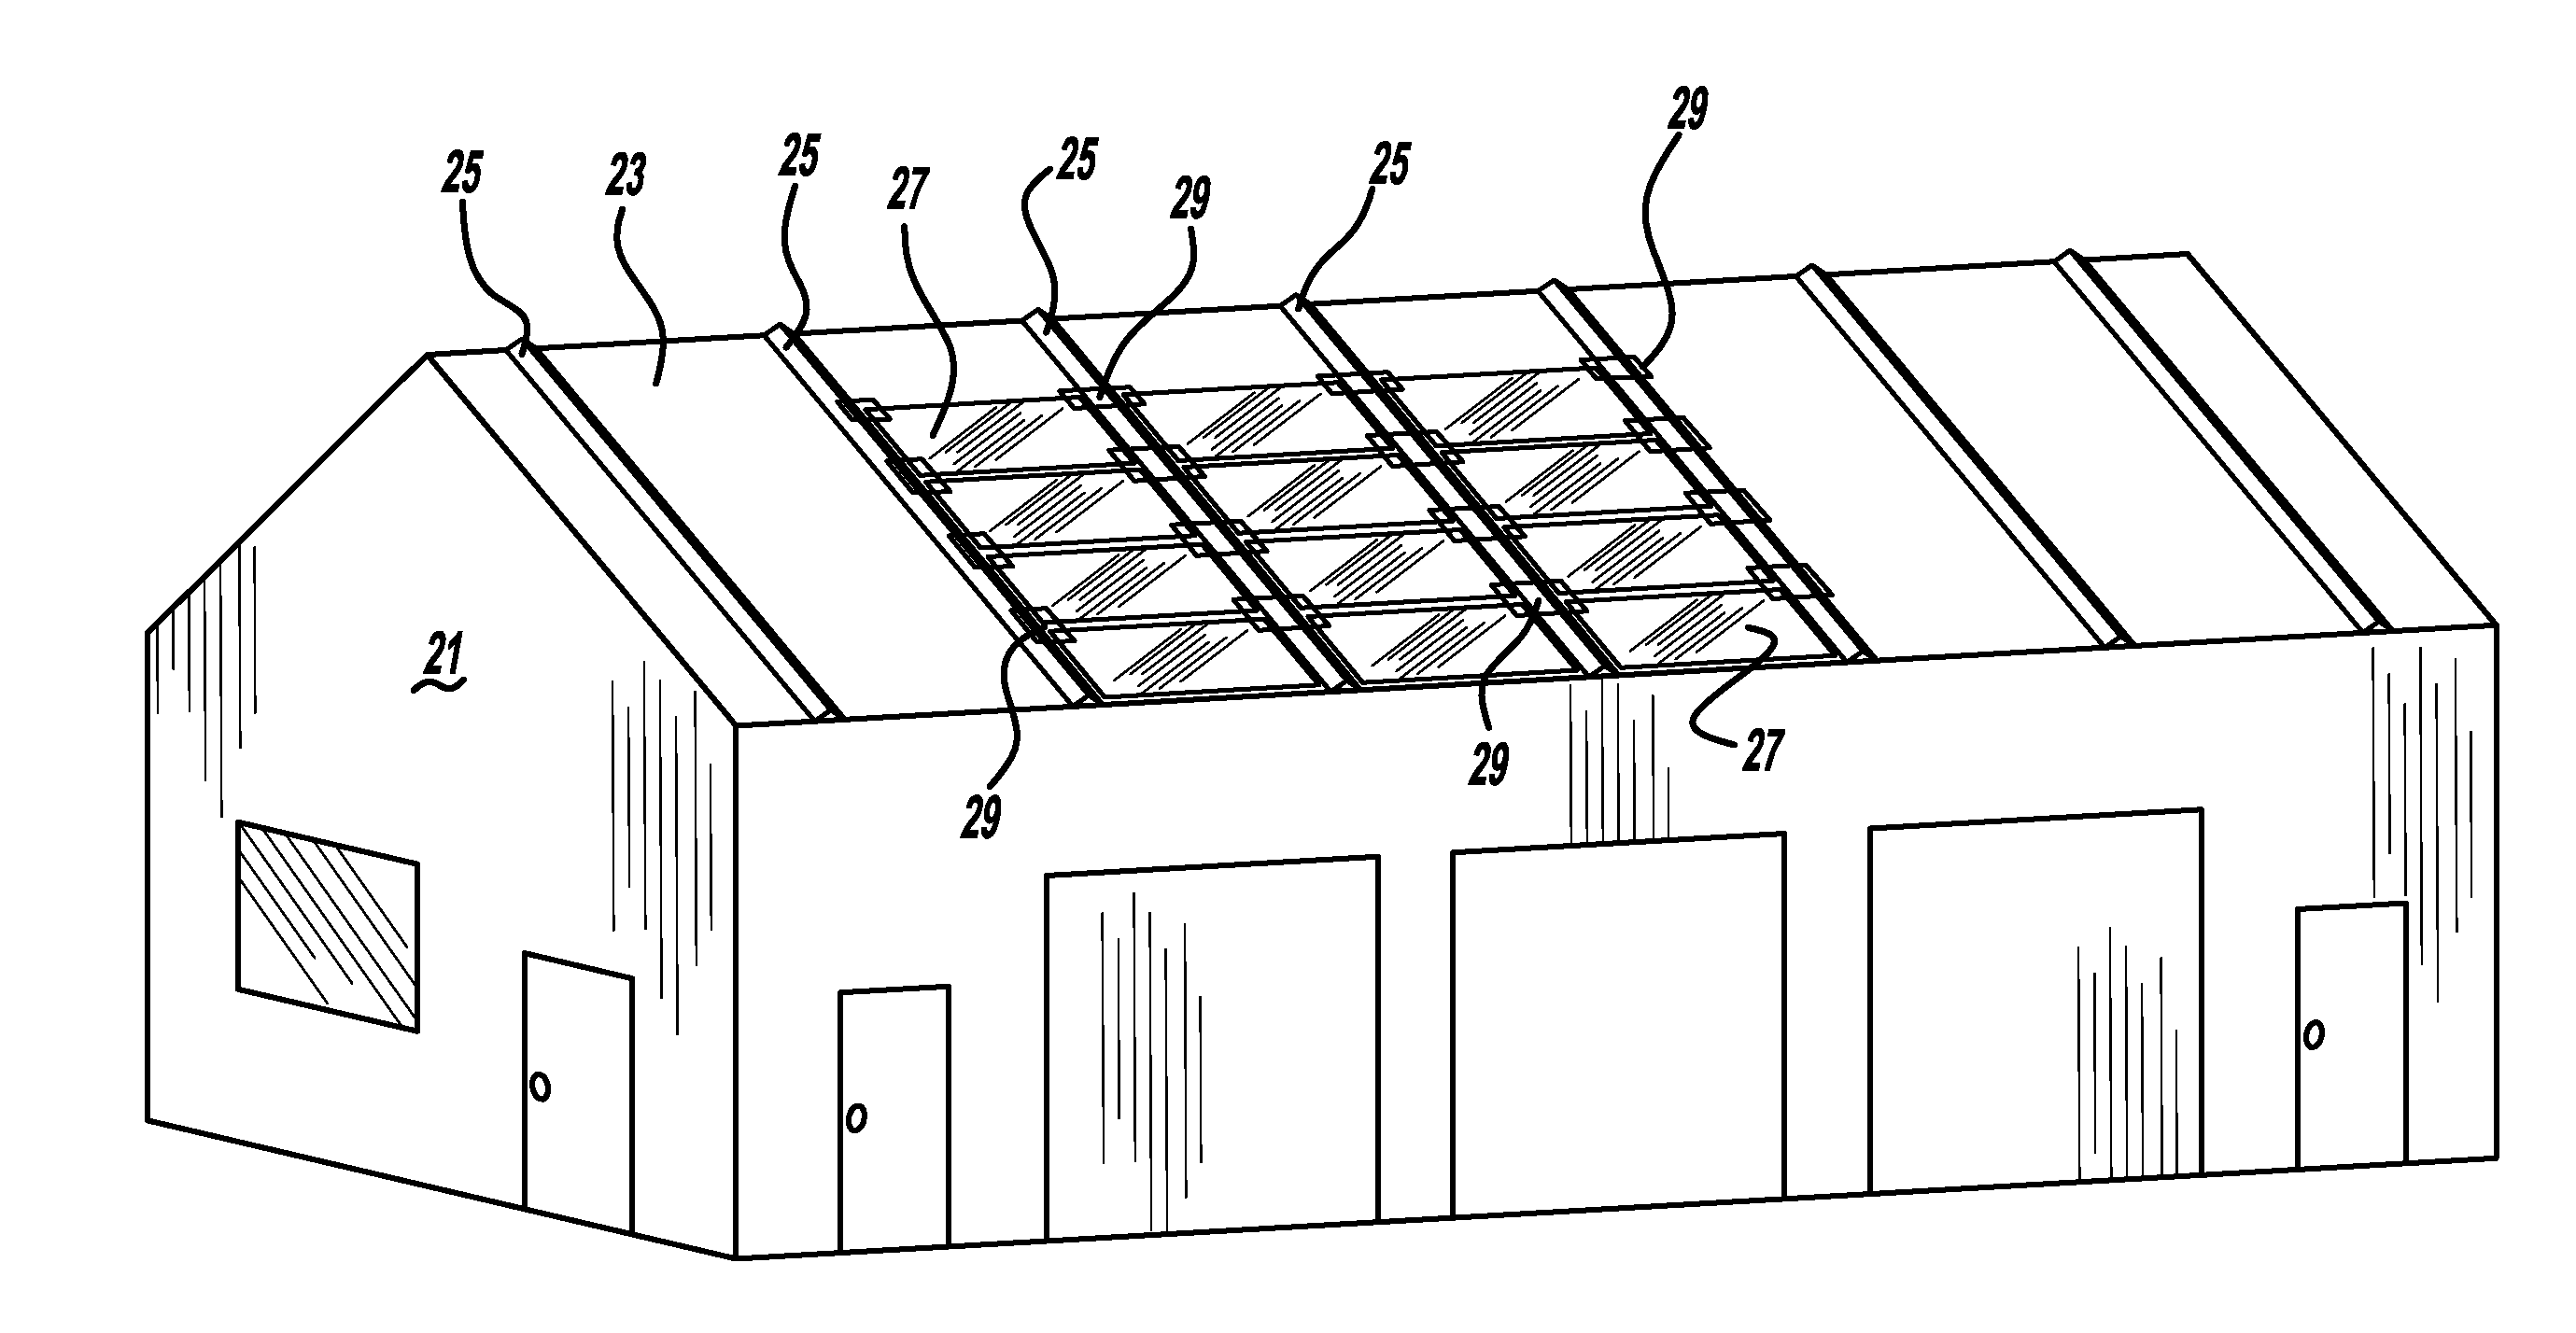 Solar panel attachment system for a roof